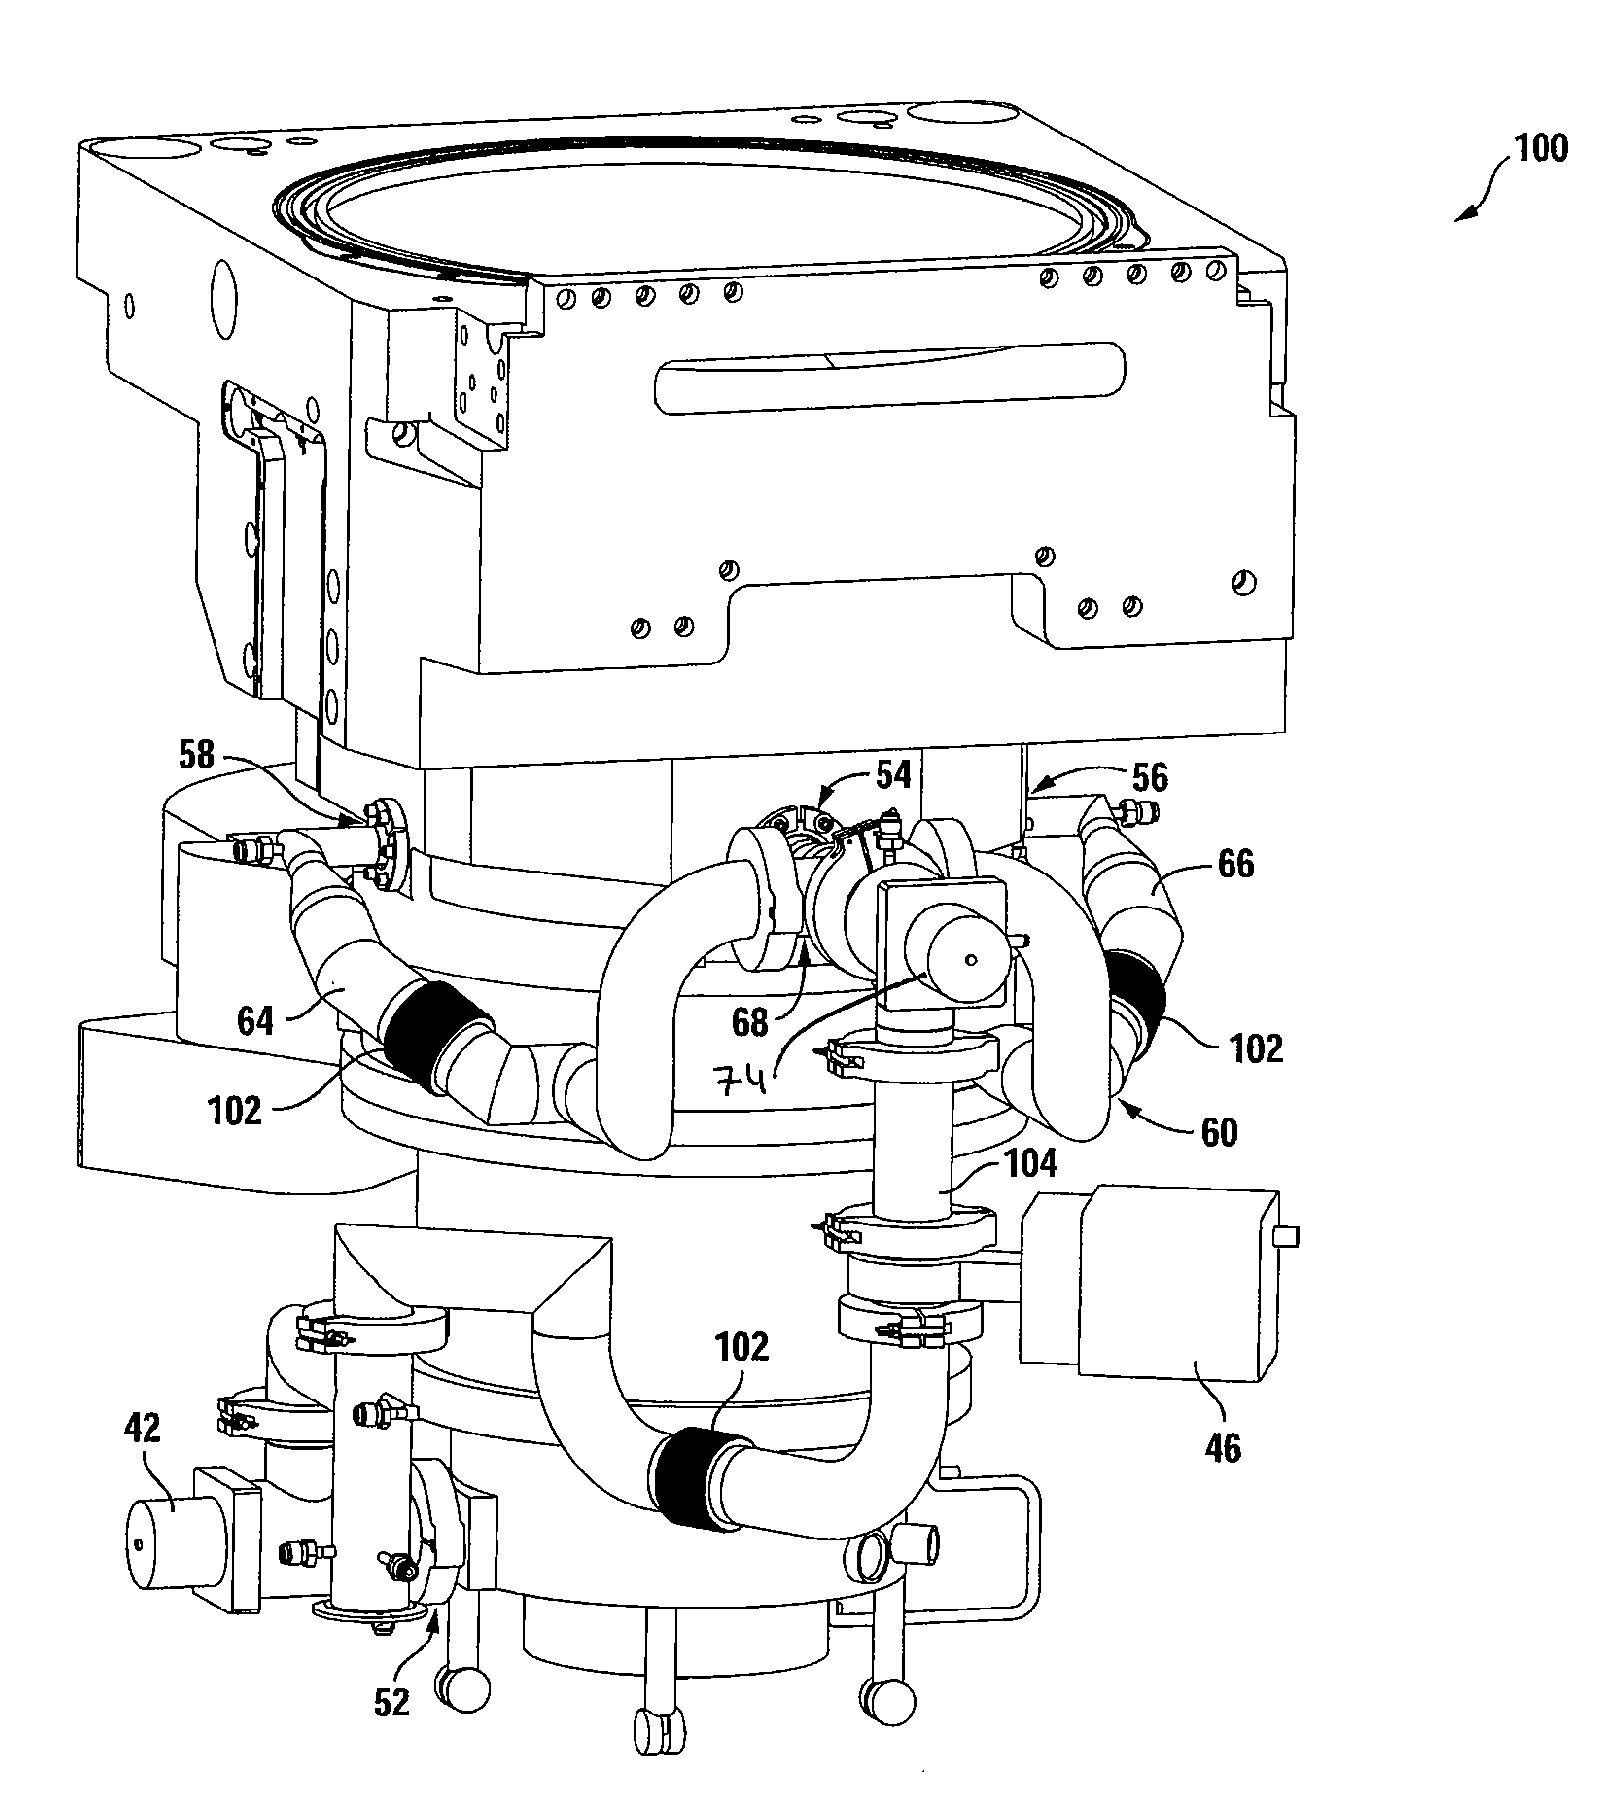 Multi-port pumping system for substrate processing chambers